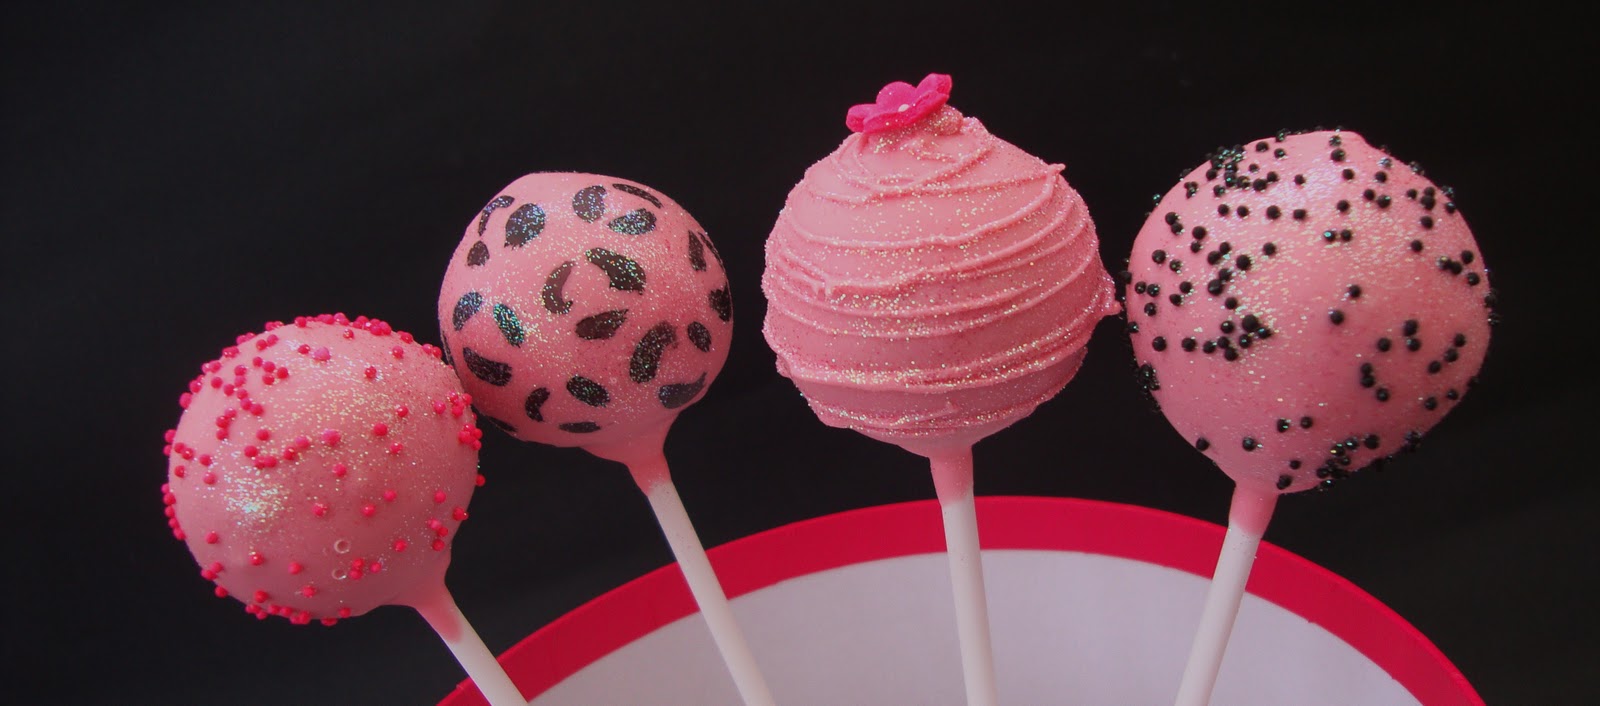 pretty in pink cake pops.